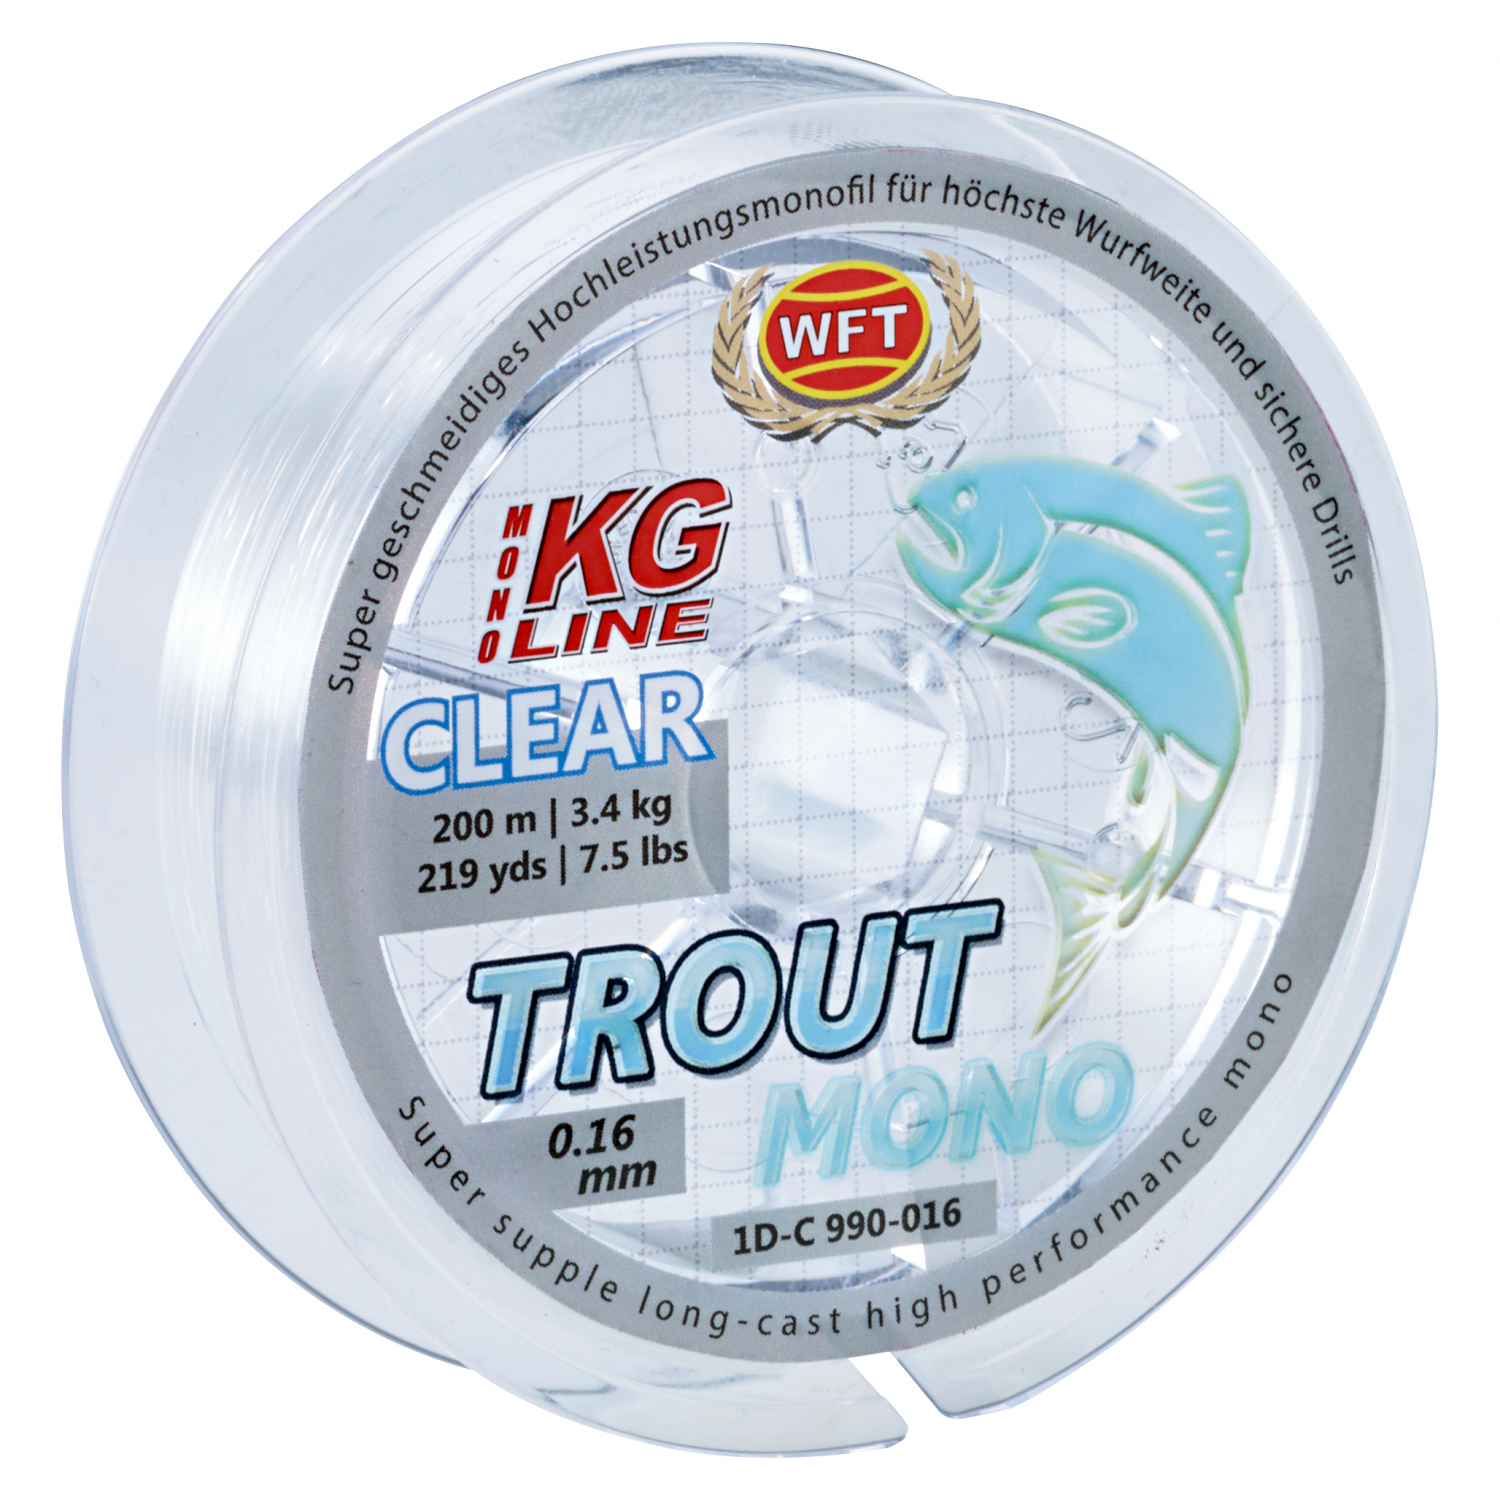 WFT Fishing Line Trout Mono (clear, 200 m) at low prices